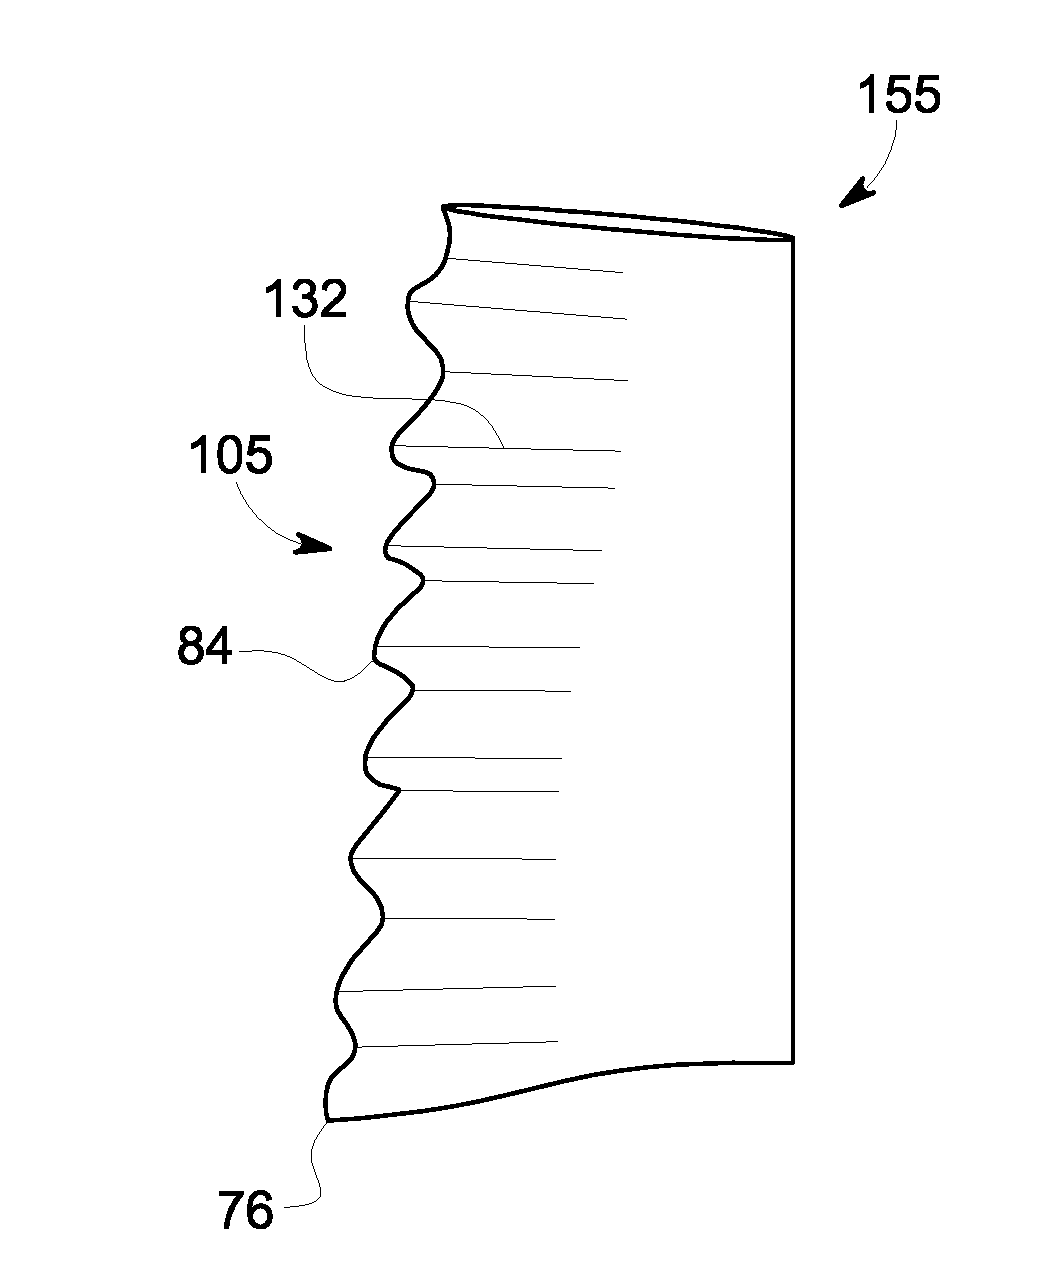 Airfoils for wake desensitization and method for fabricating same